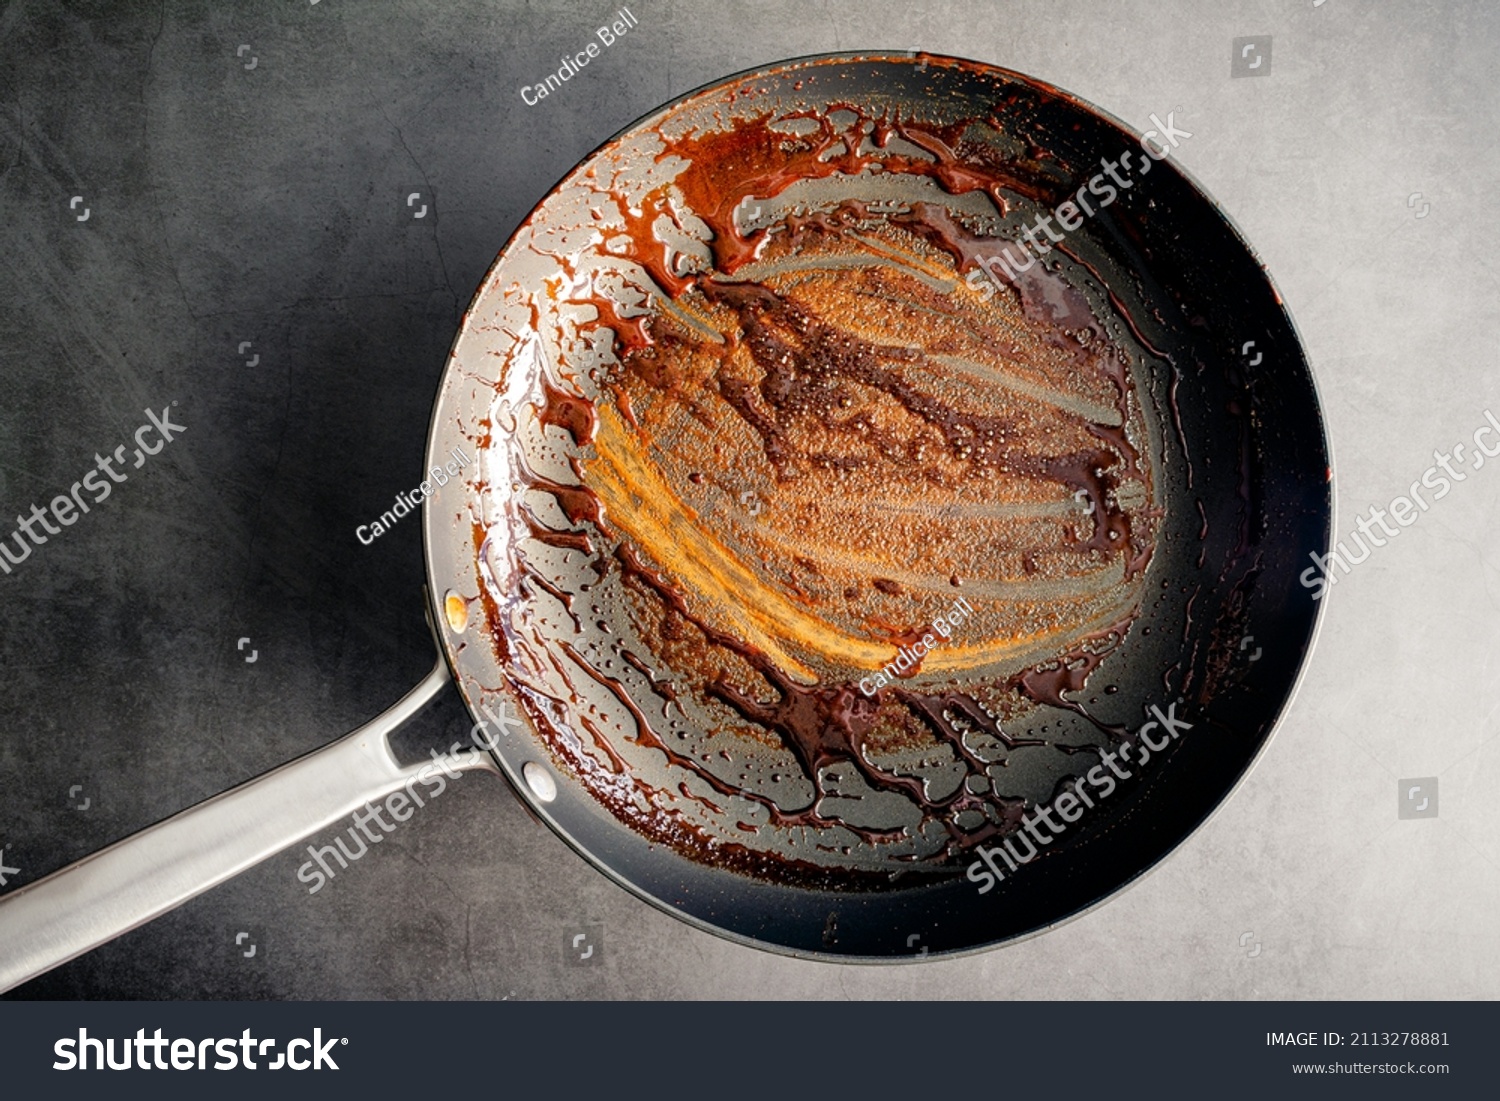 Dirty Nonstick Skillet Used to Make a Balsamic Reduction: An unwashed frying pan covered in a sticky glaze #2113278881